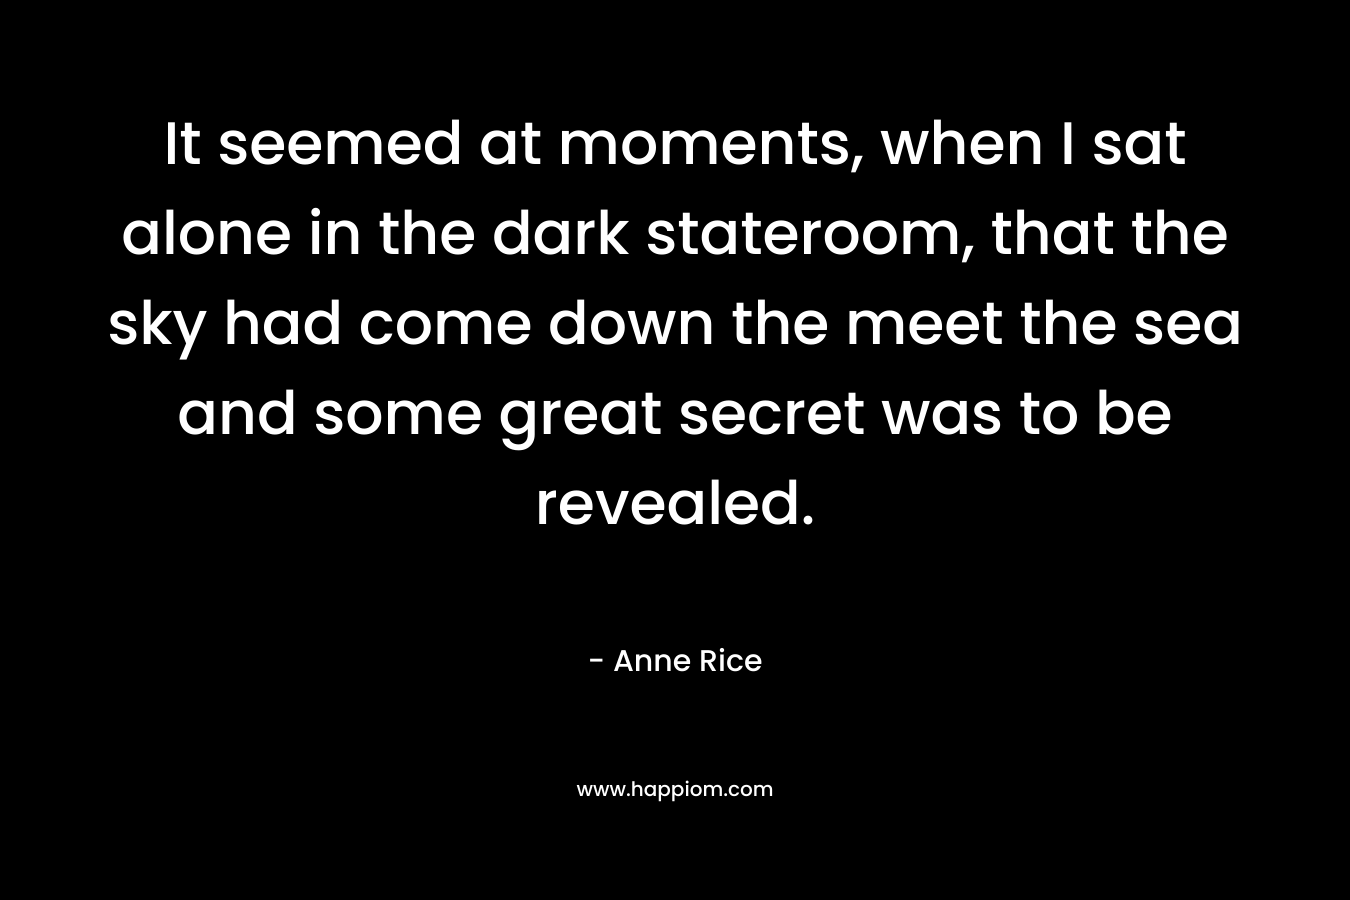 It seemed at moments, when I sat alone in the dark stateroom, that the sky had come down the meet the sea and some great secret was to be revealed. – Anne Rice